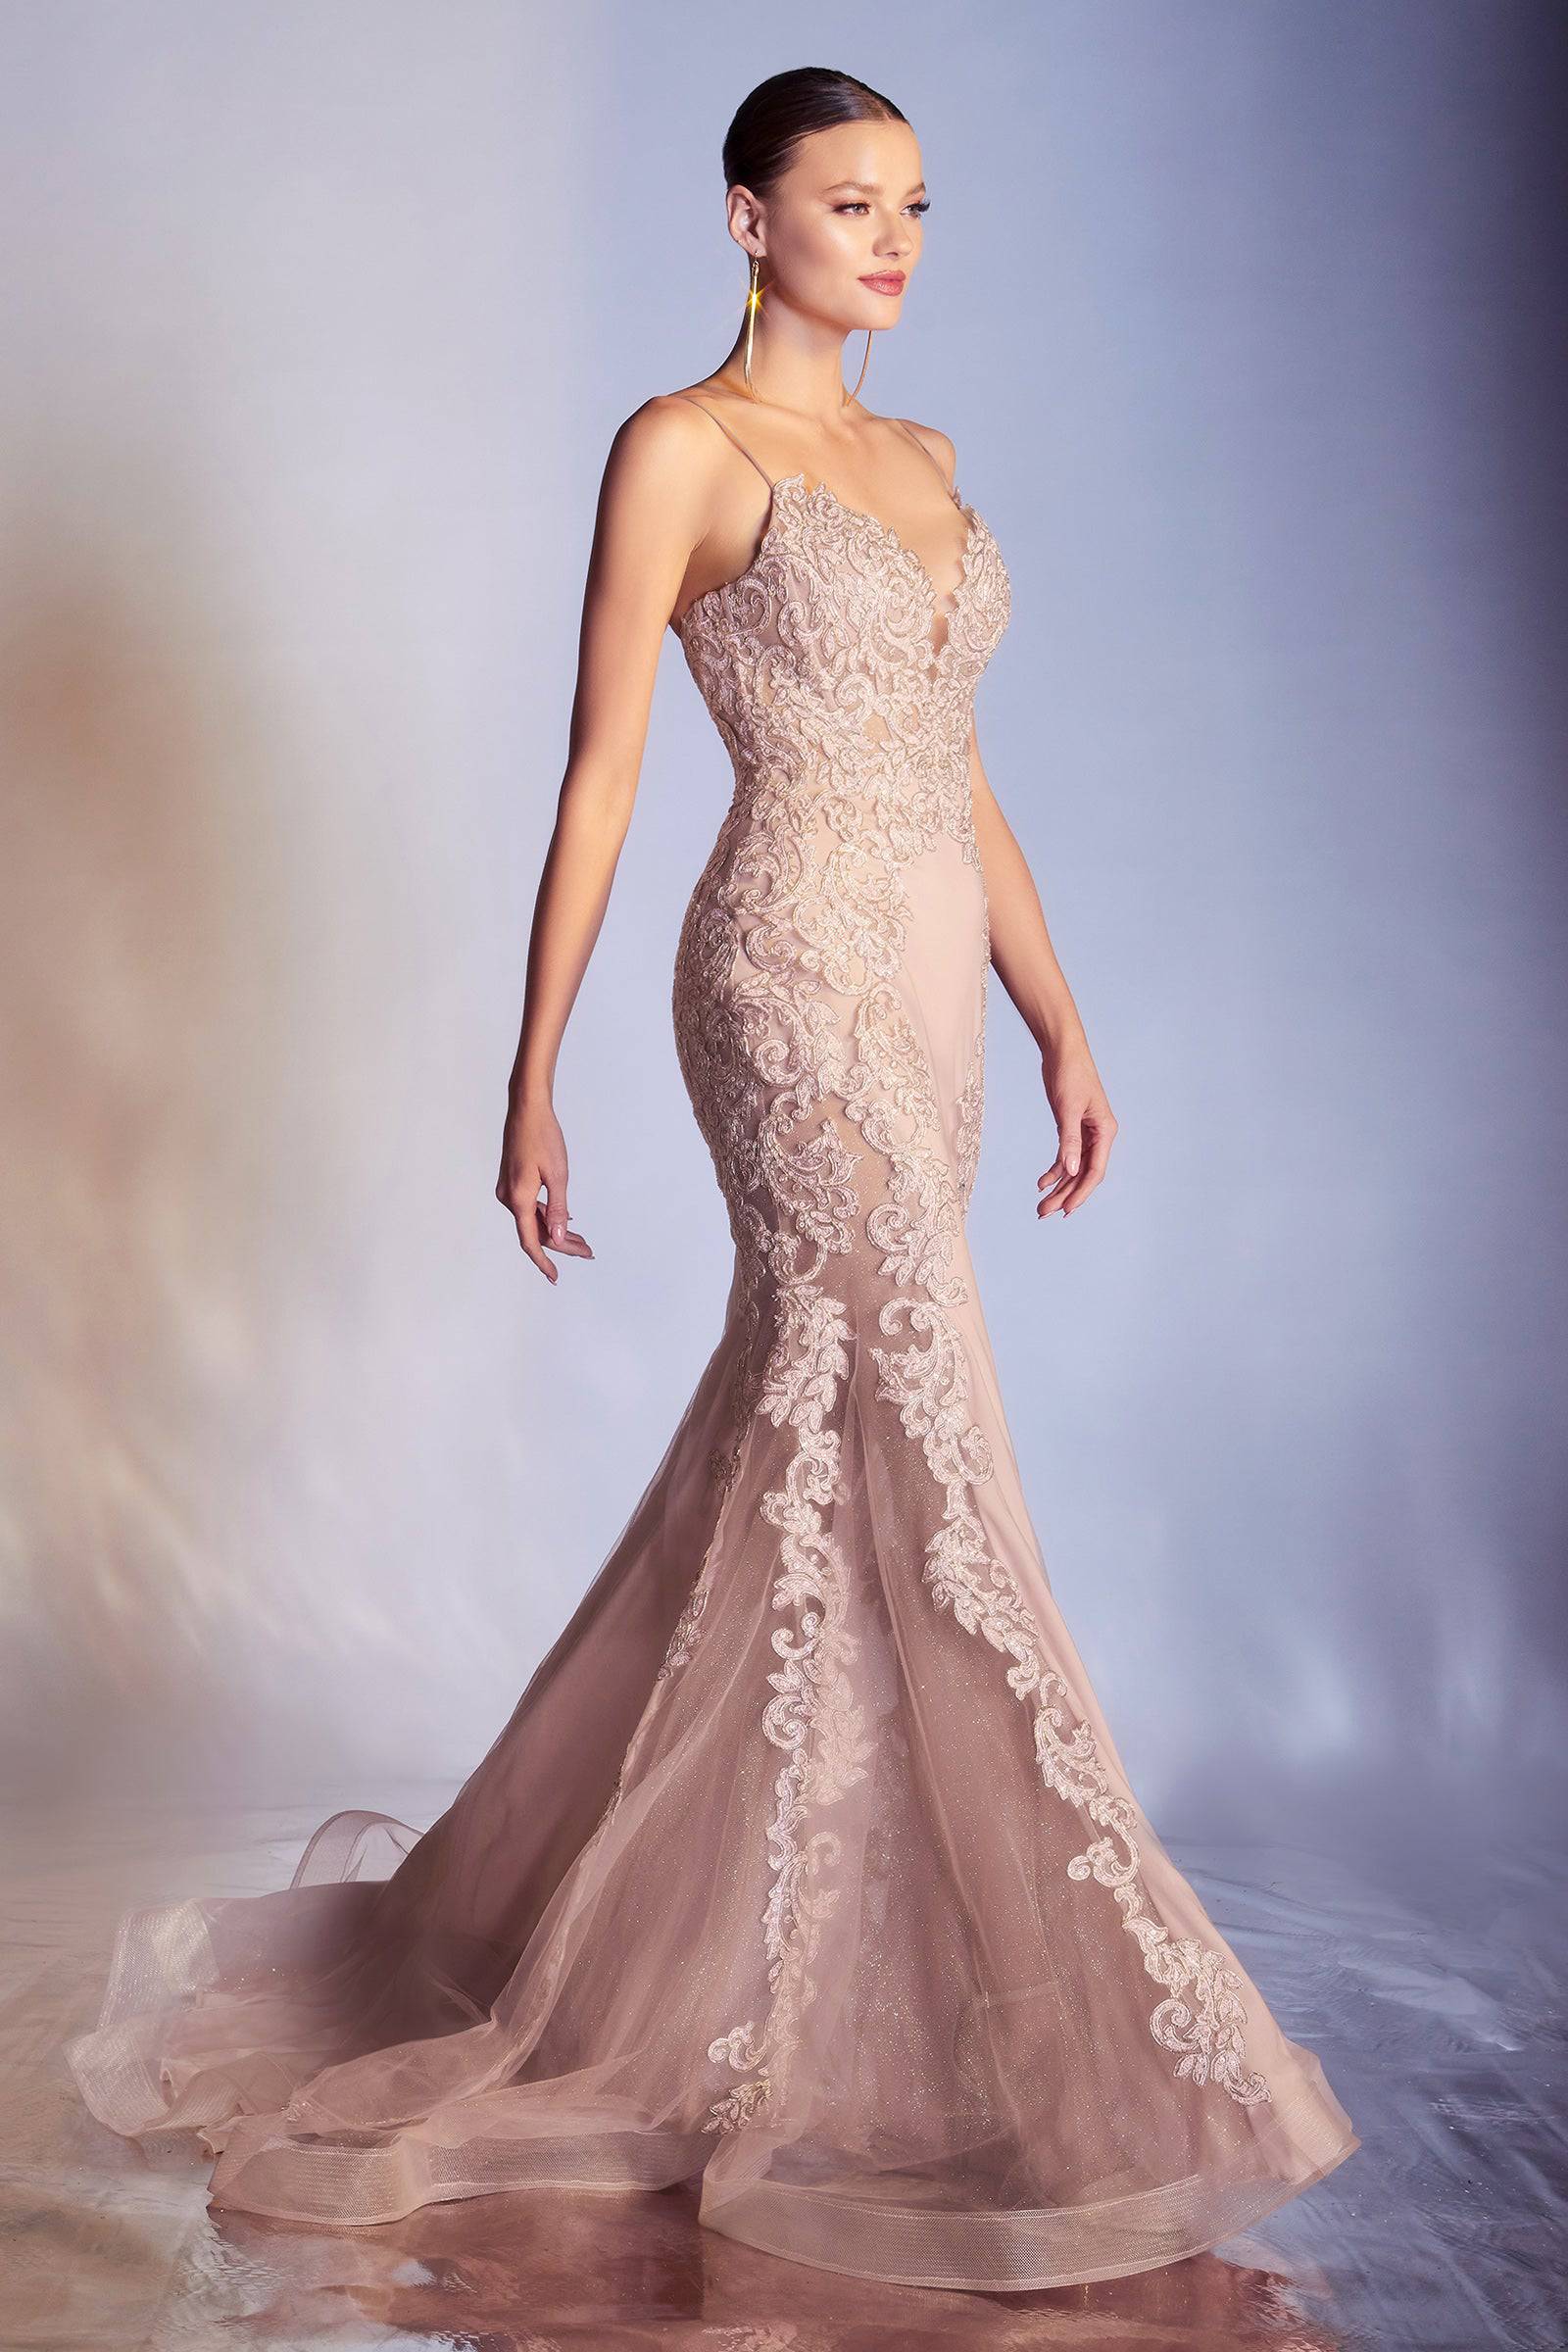 Elegant Mermaid Style Gown with Embroidered Bodice and Deep